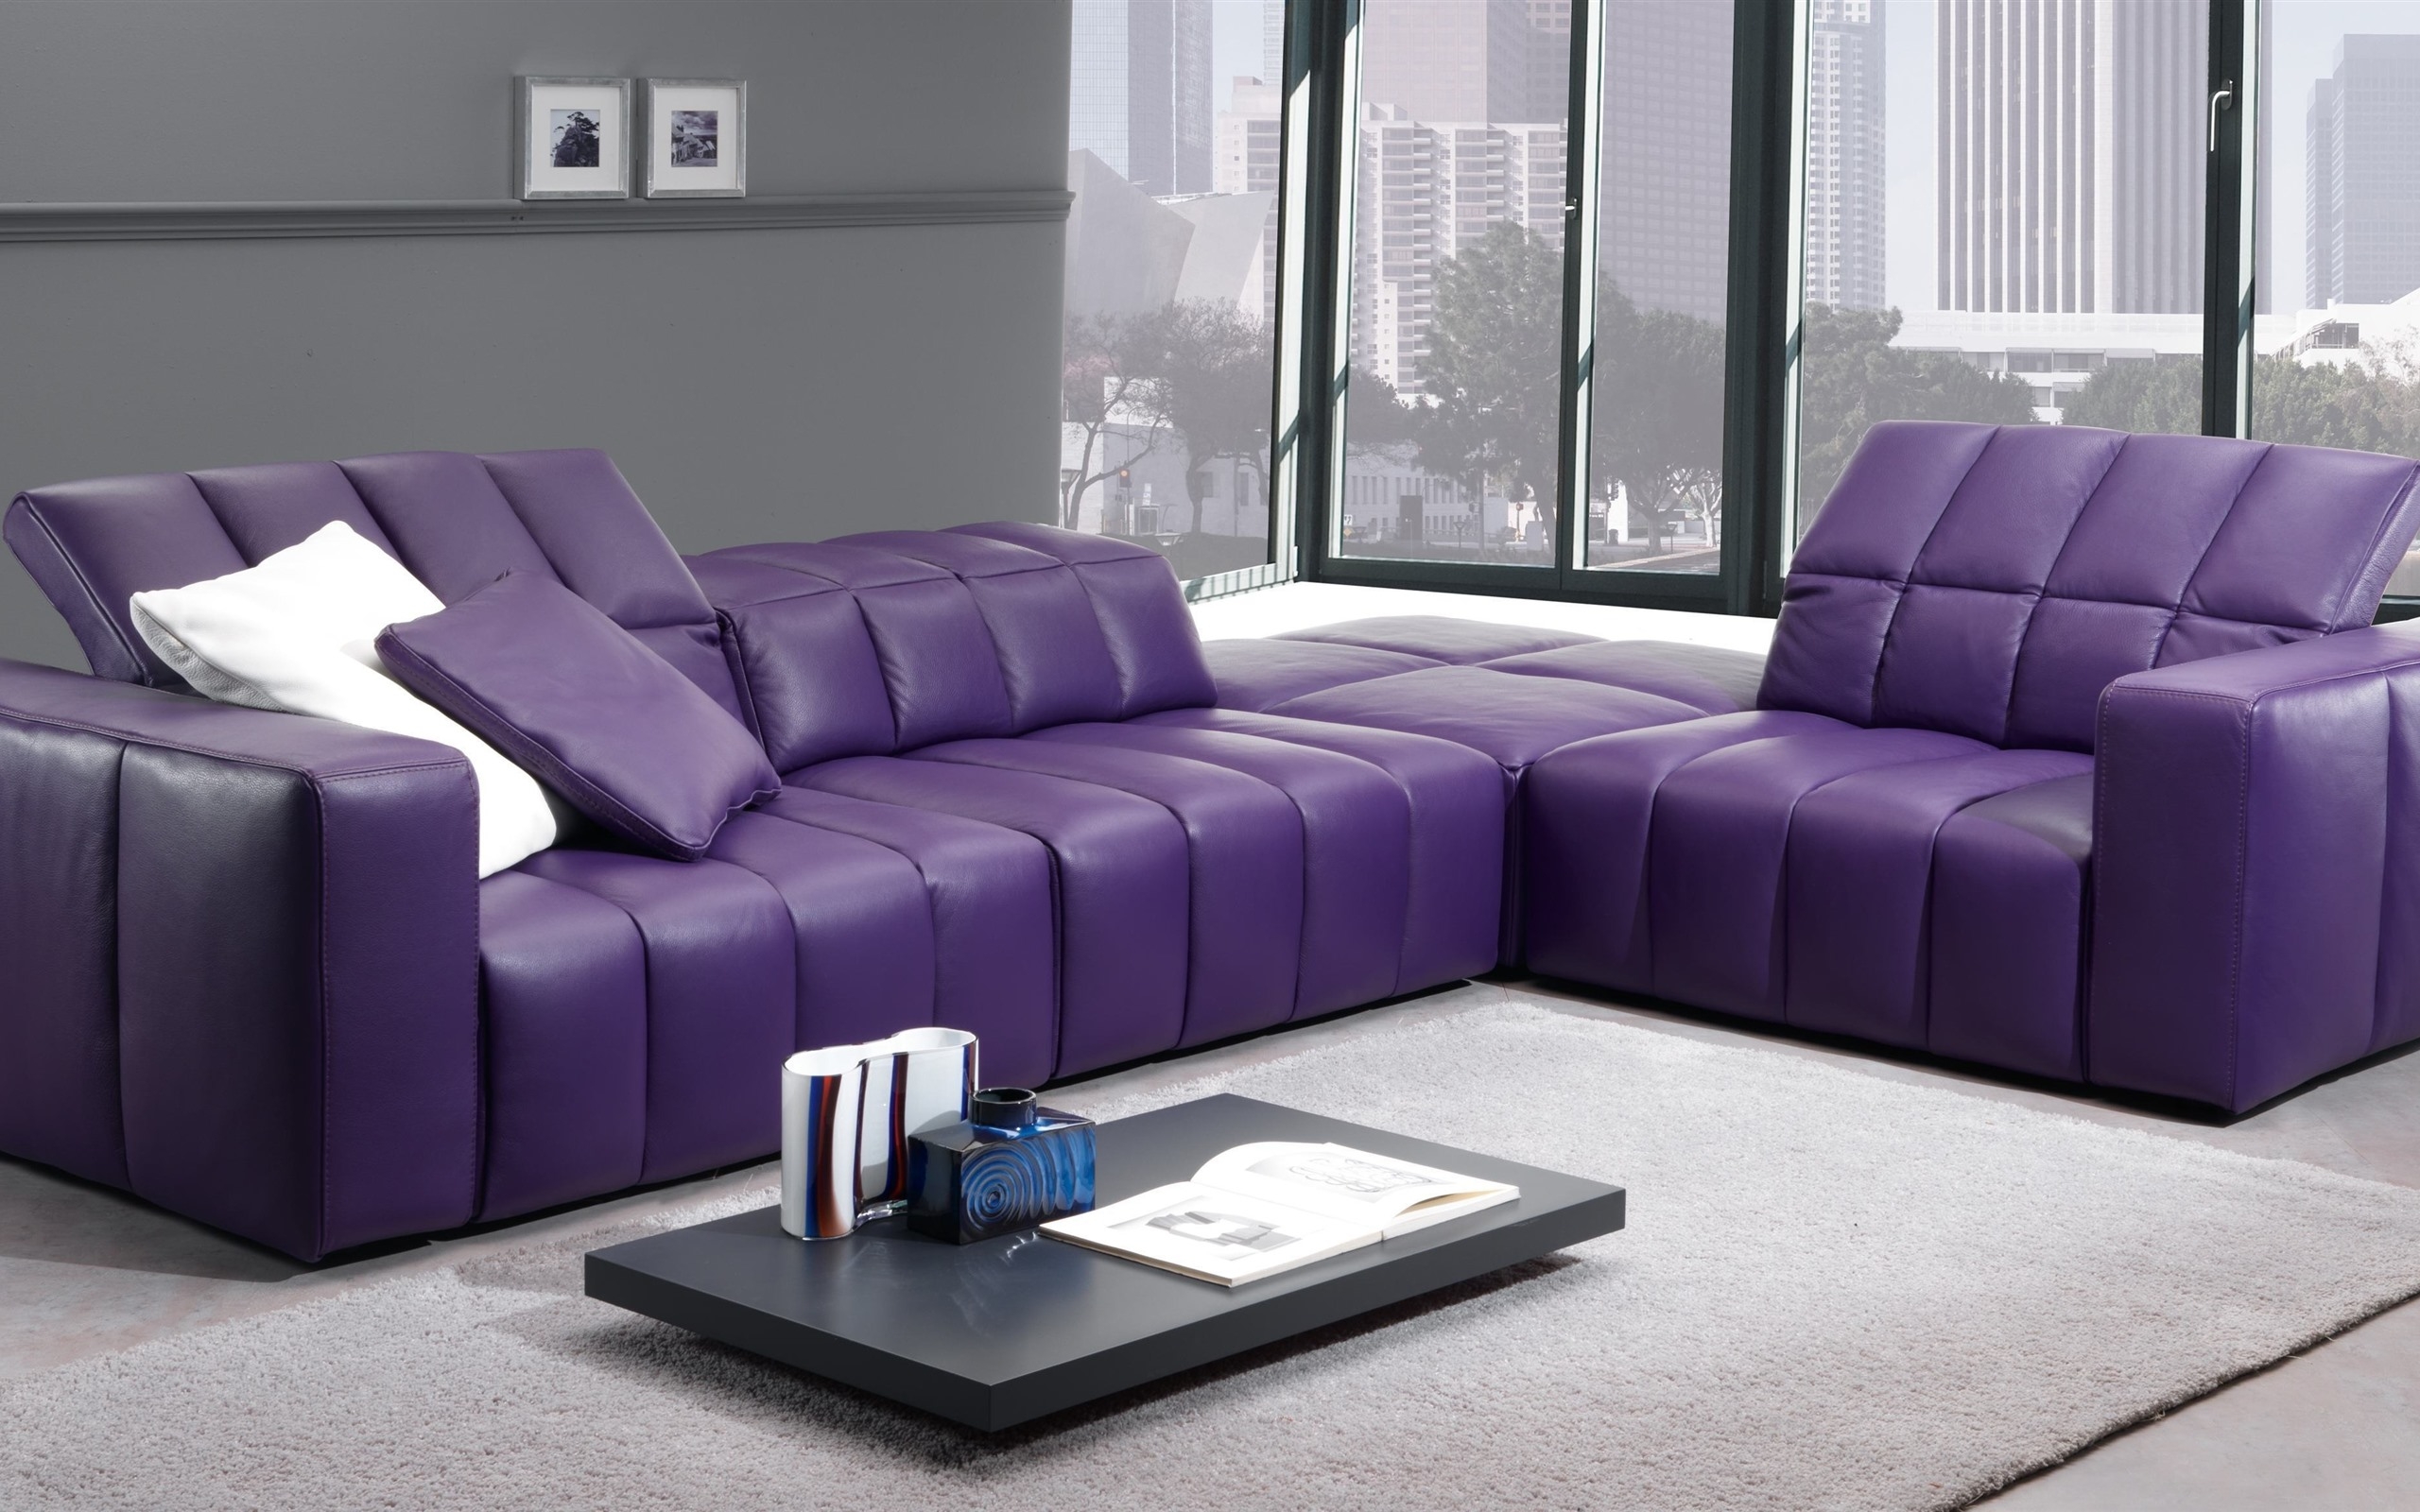 Purple leather sectional with gray 1